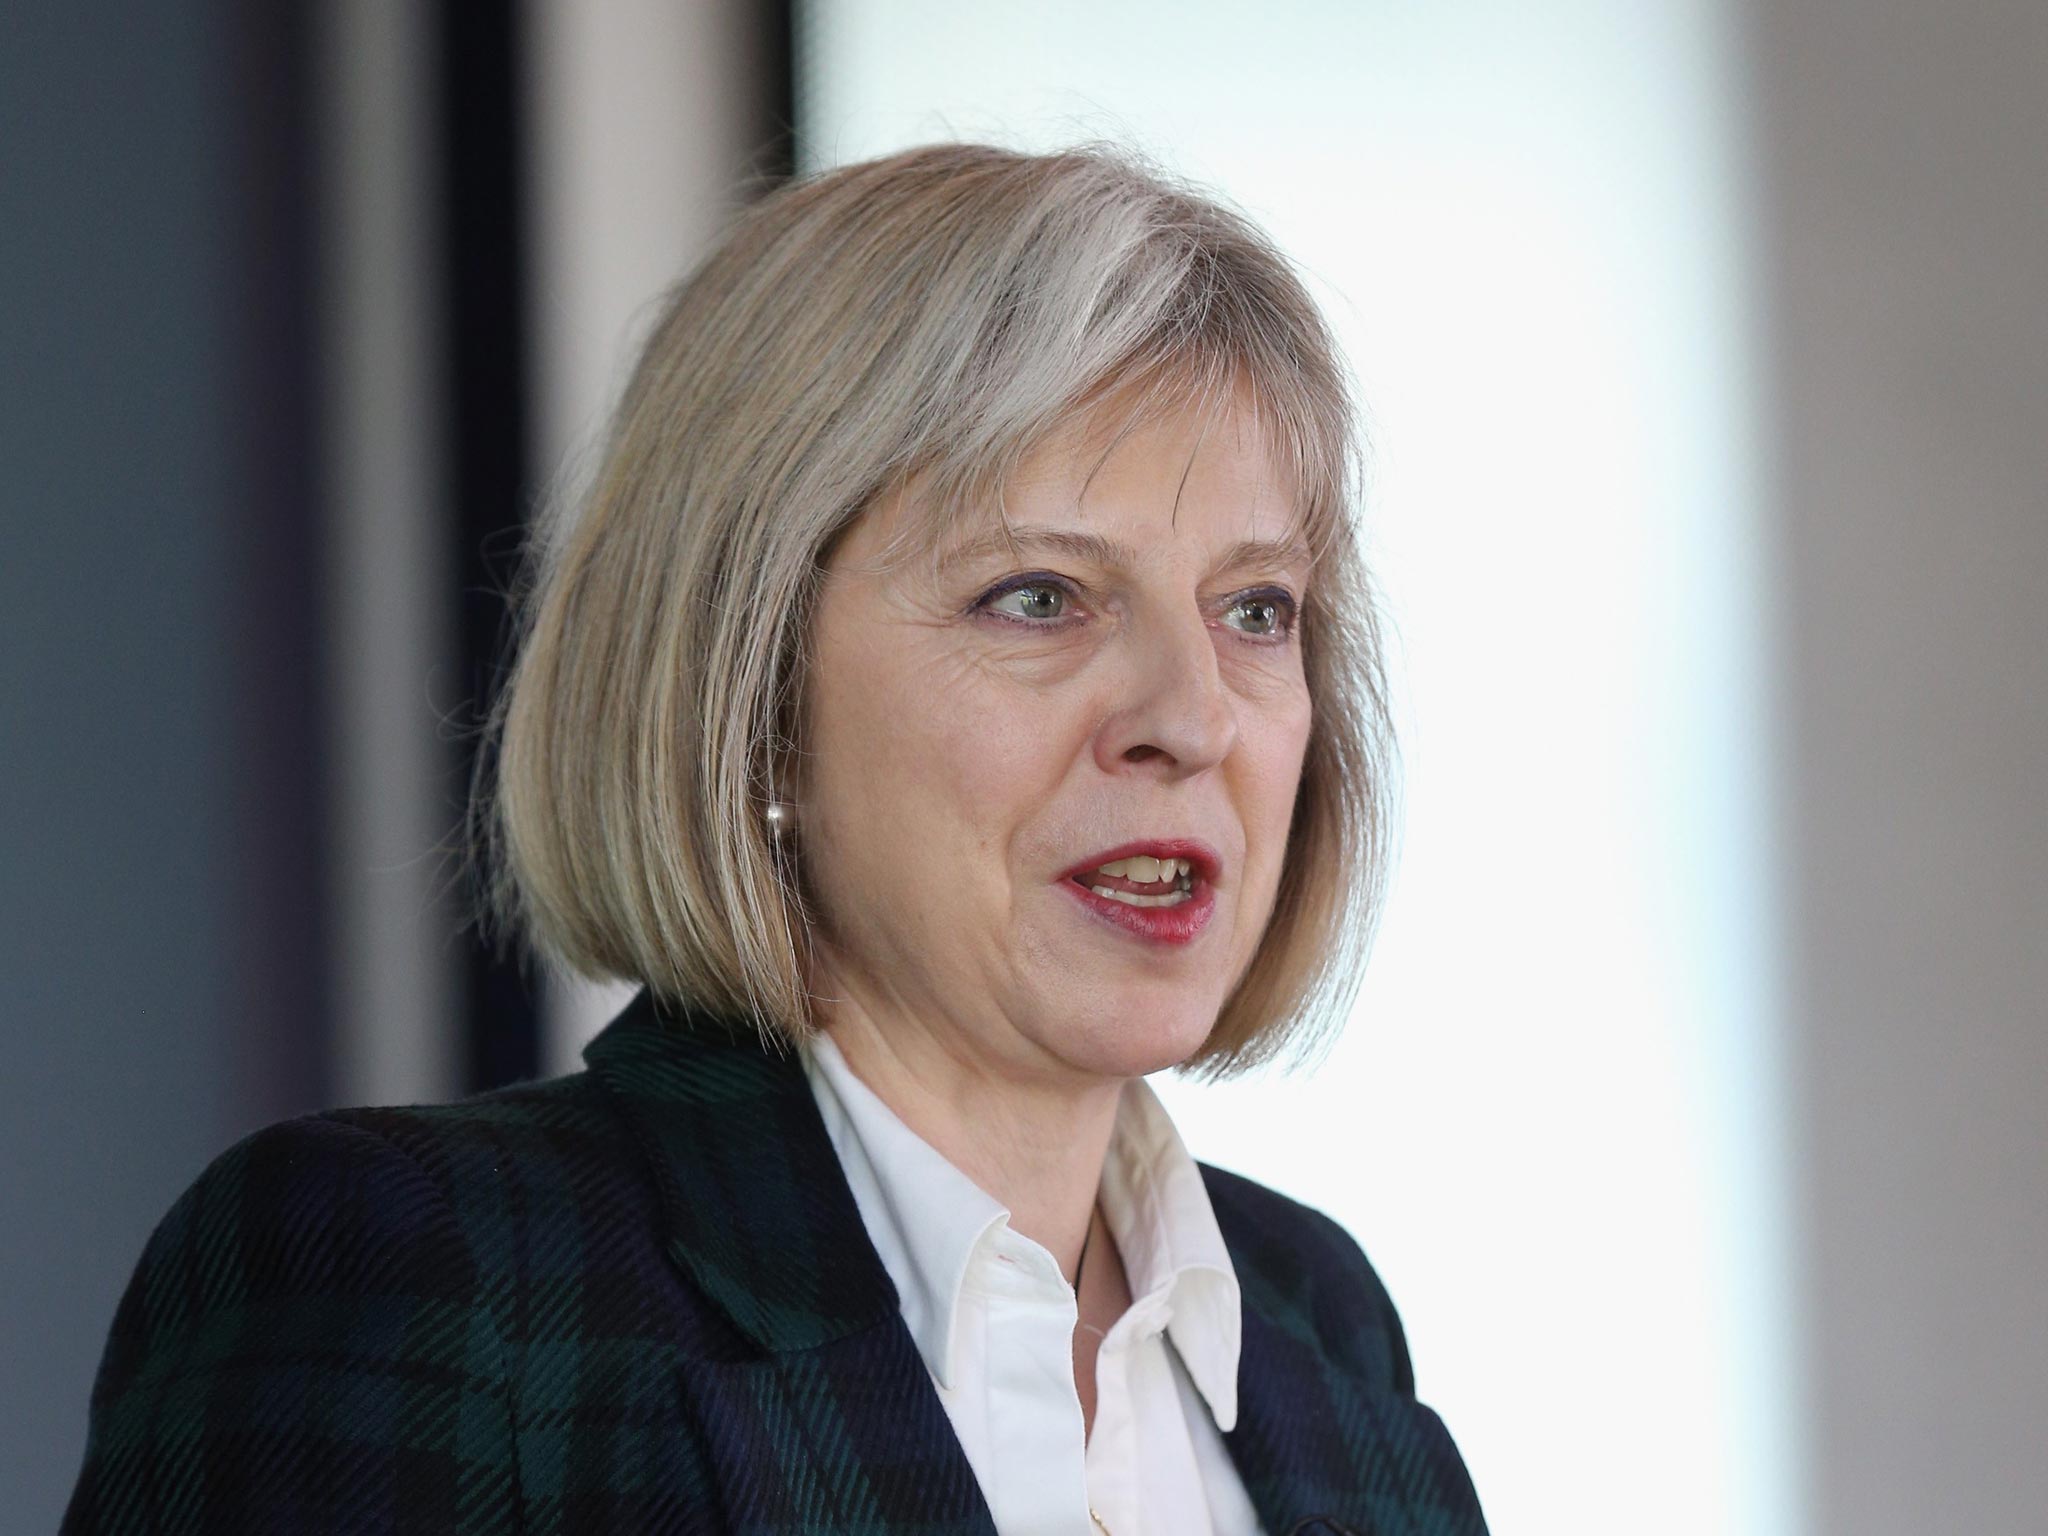 Home Secretary Theresa May was criticised for her speech on Wednesday concerning immigration